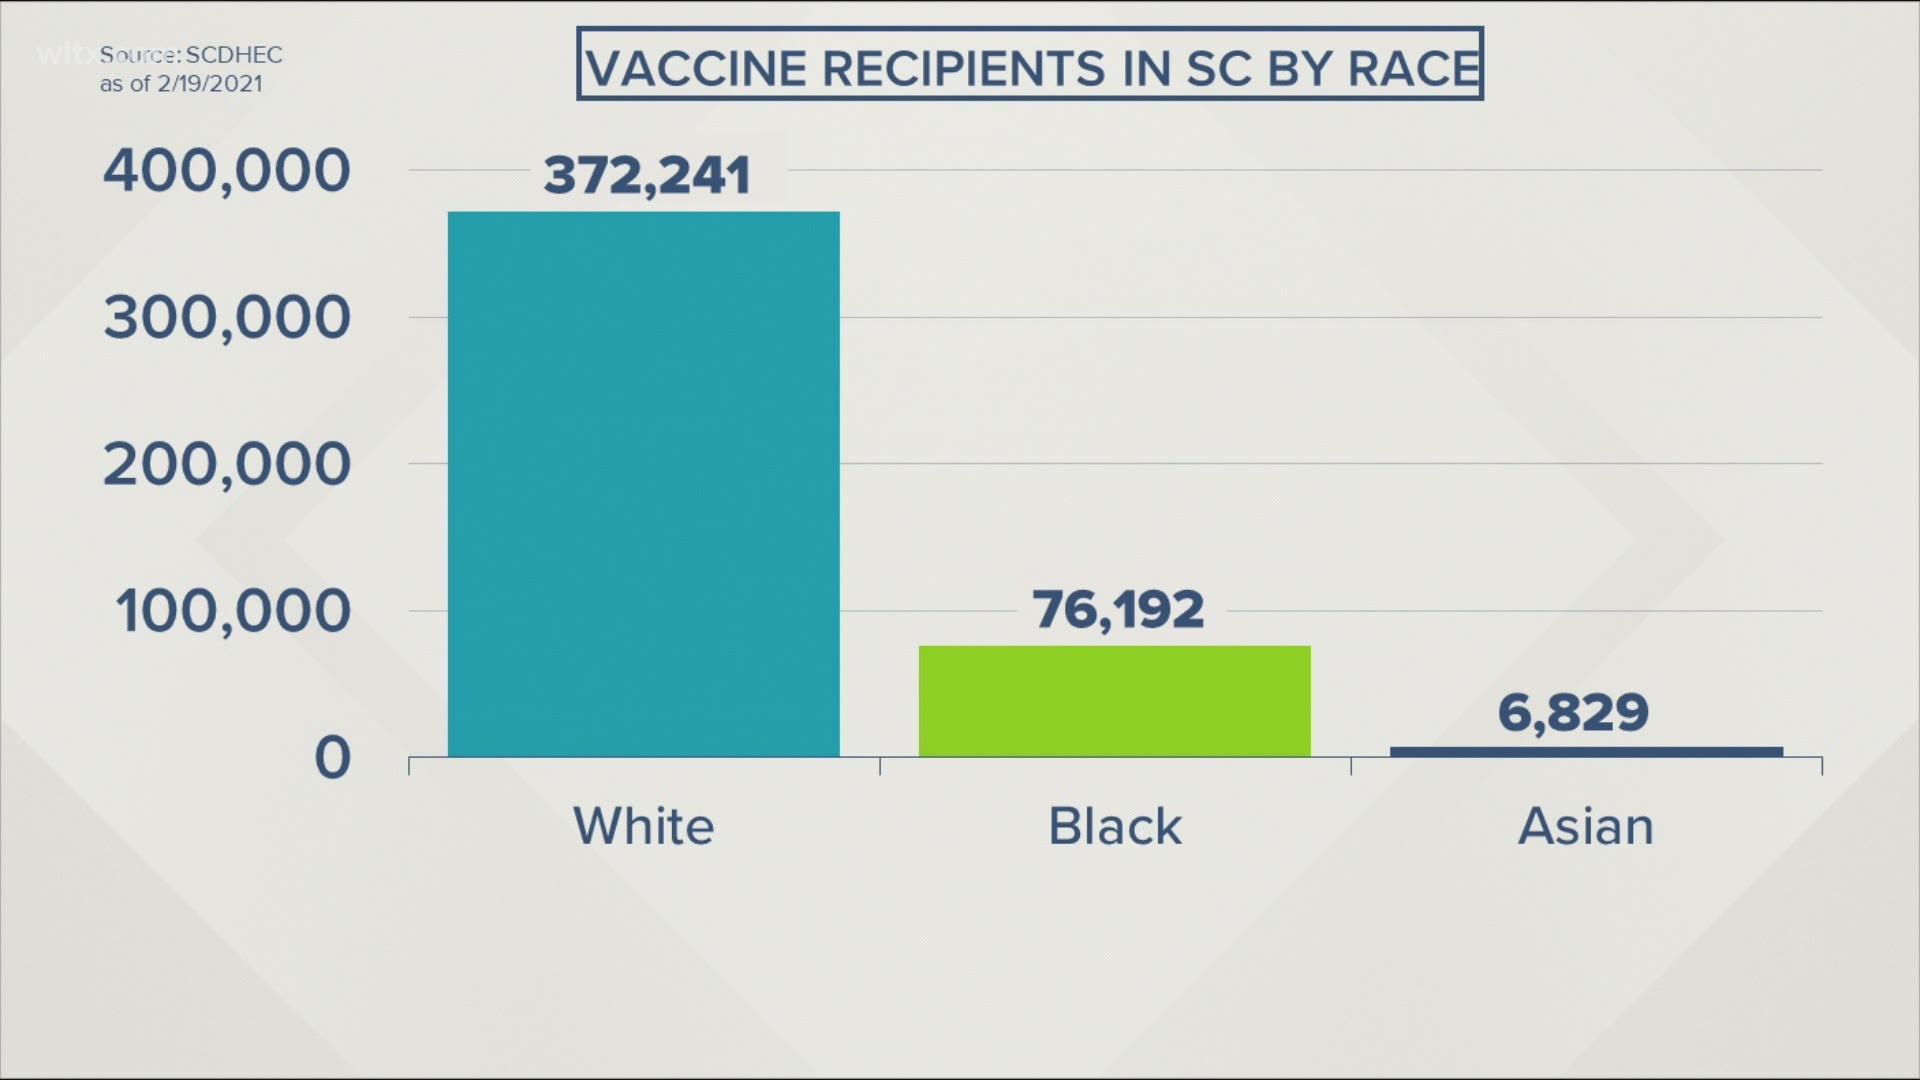 According to Dr. Linda Bell, skepticism over the COVID19 vaccine is improving in the South Carolina's racial and ethnic minority communities